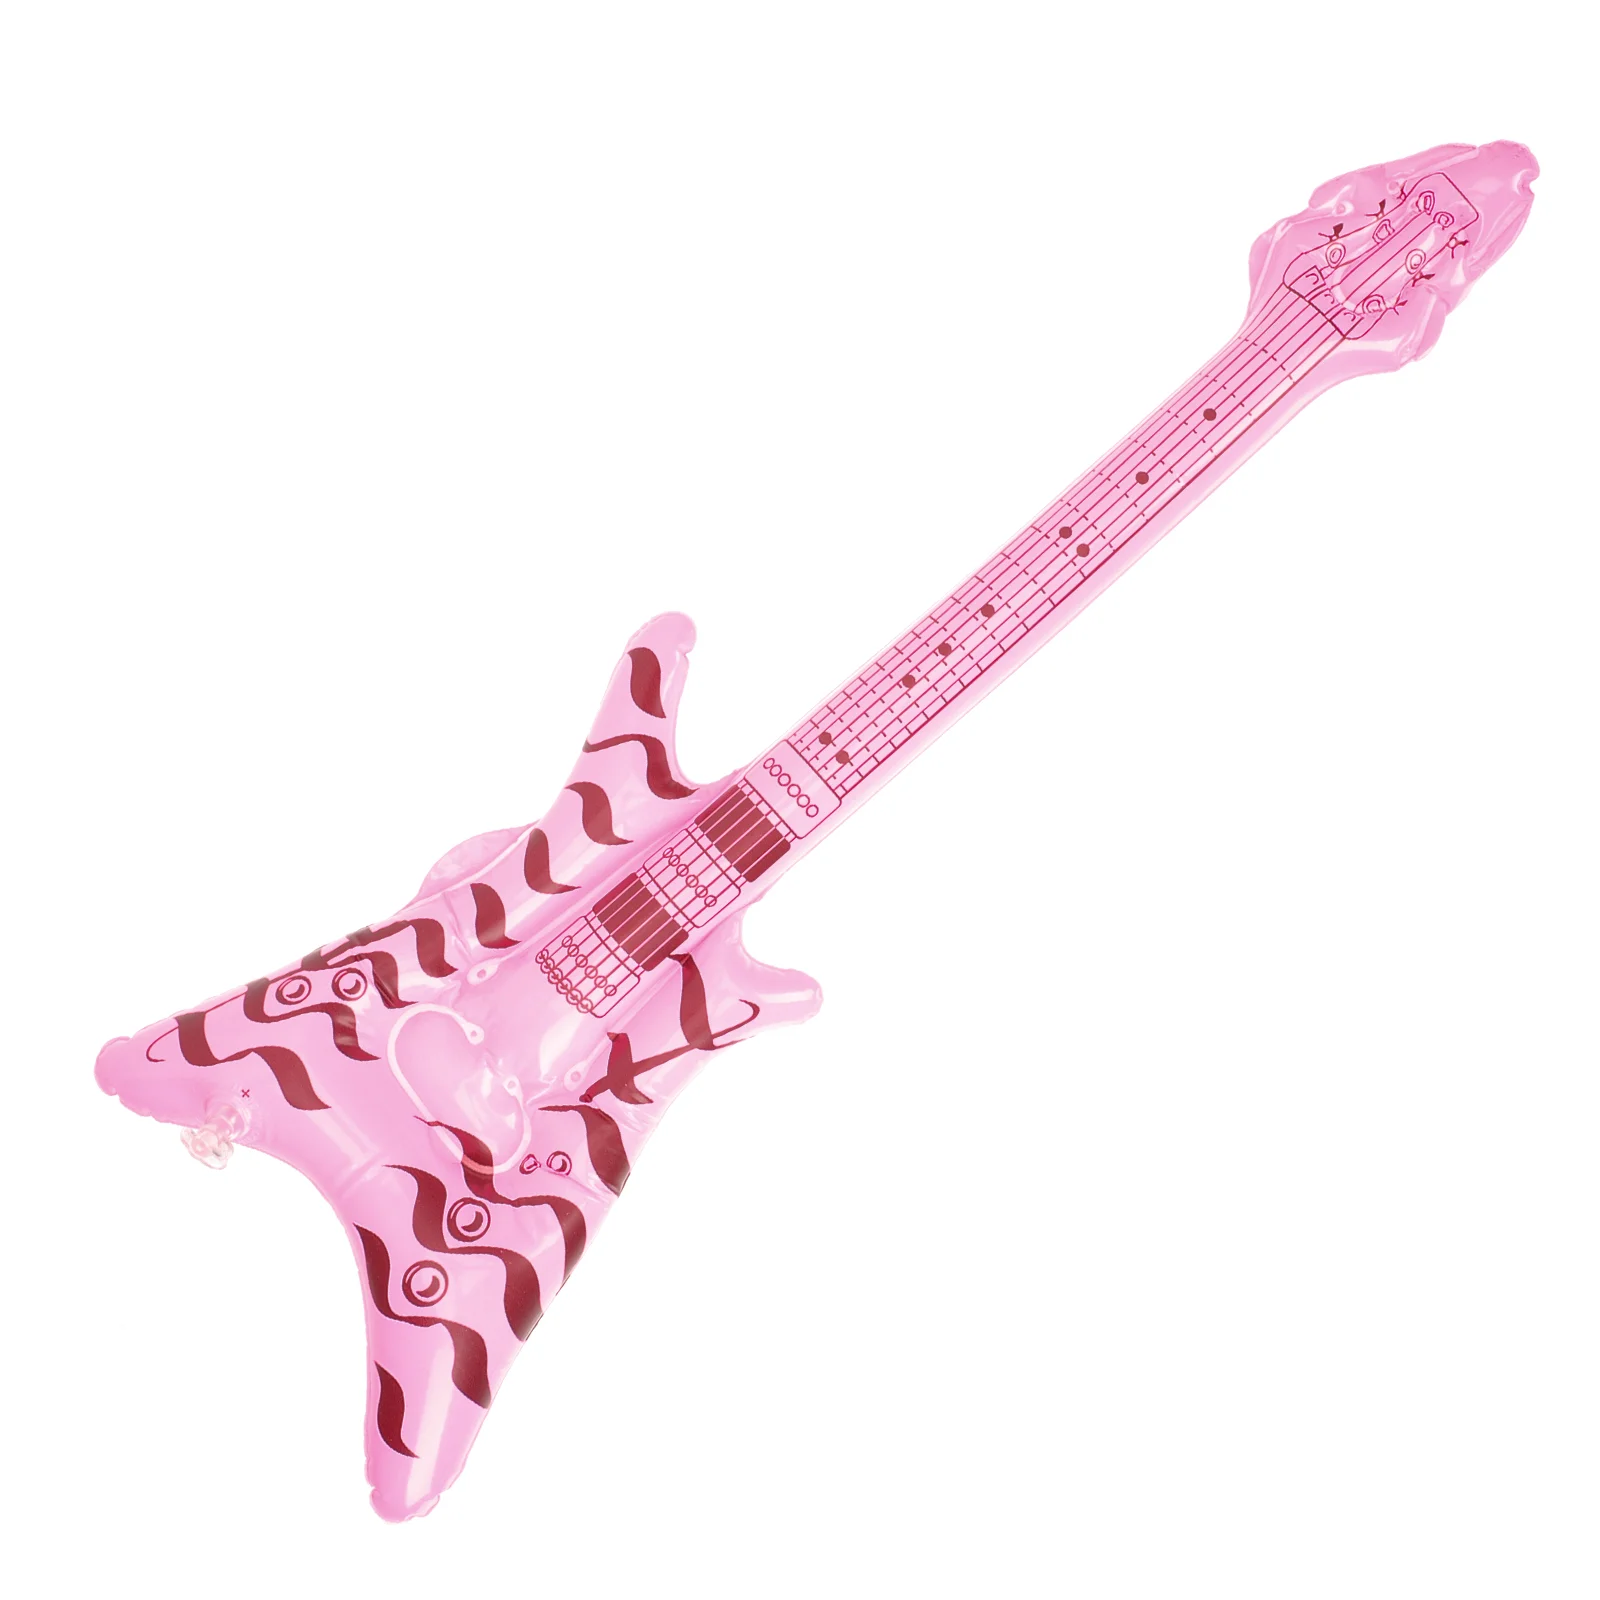 

Inflatable Rock Instrument Guitar Prop Party Supply Stage Performance Disco Musical Decoration Instruments For Kidsations